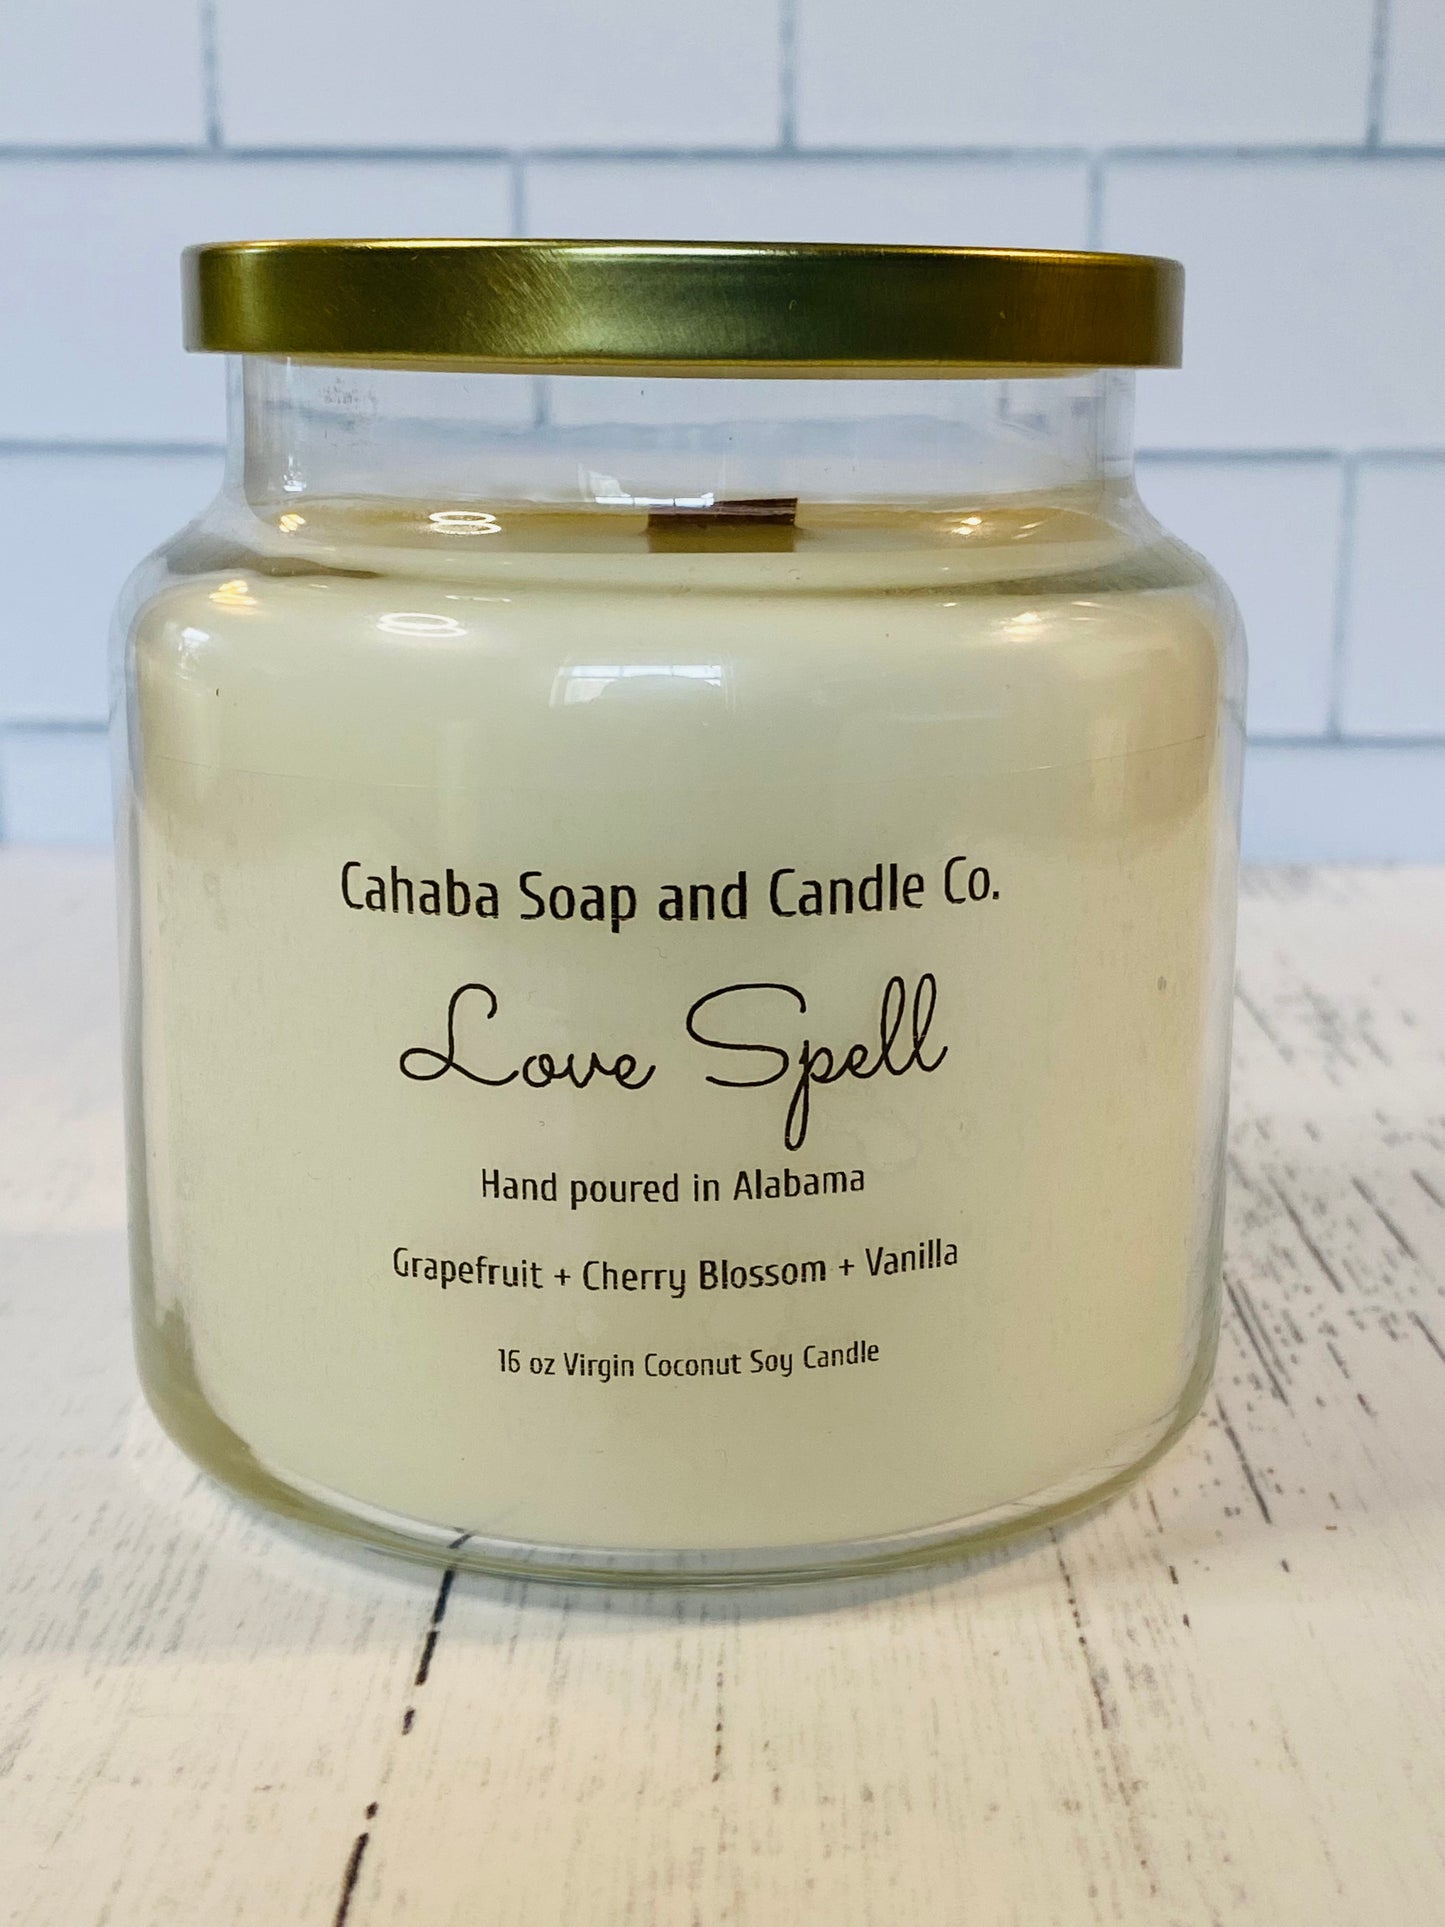 Love Spell - Cahaba Soap and Candle Company